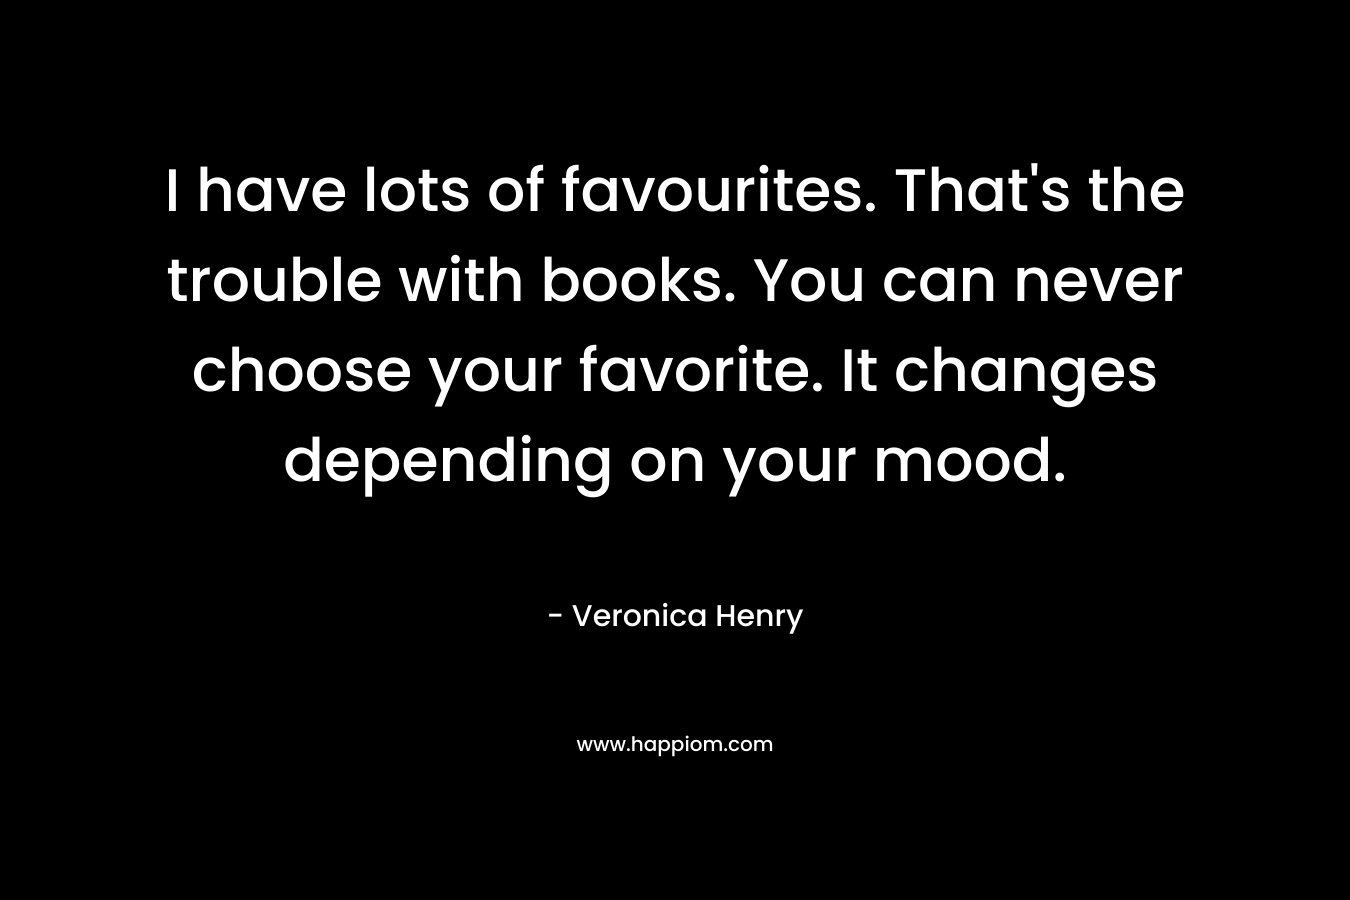 I have lots of favourites. That’s the trouble with books. You can never choose your favorite. It changes depending on your mood. – Veronica Henry